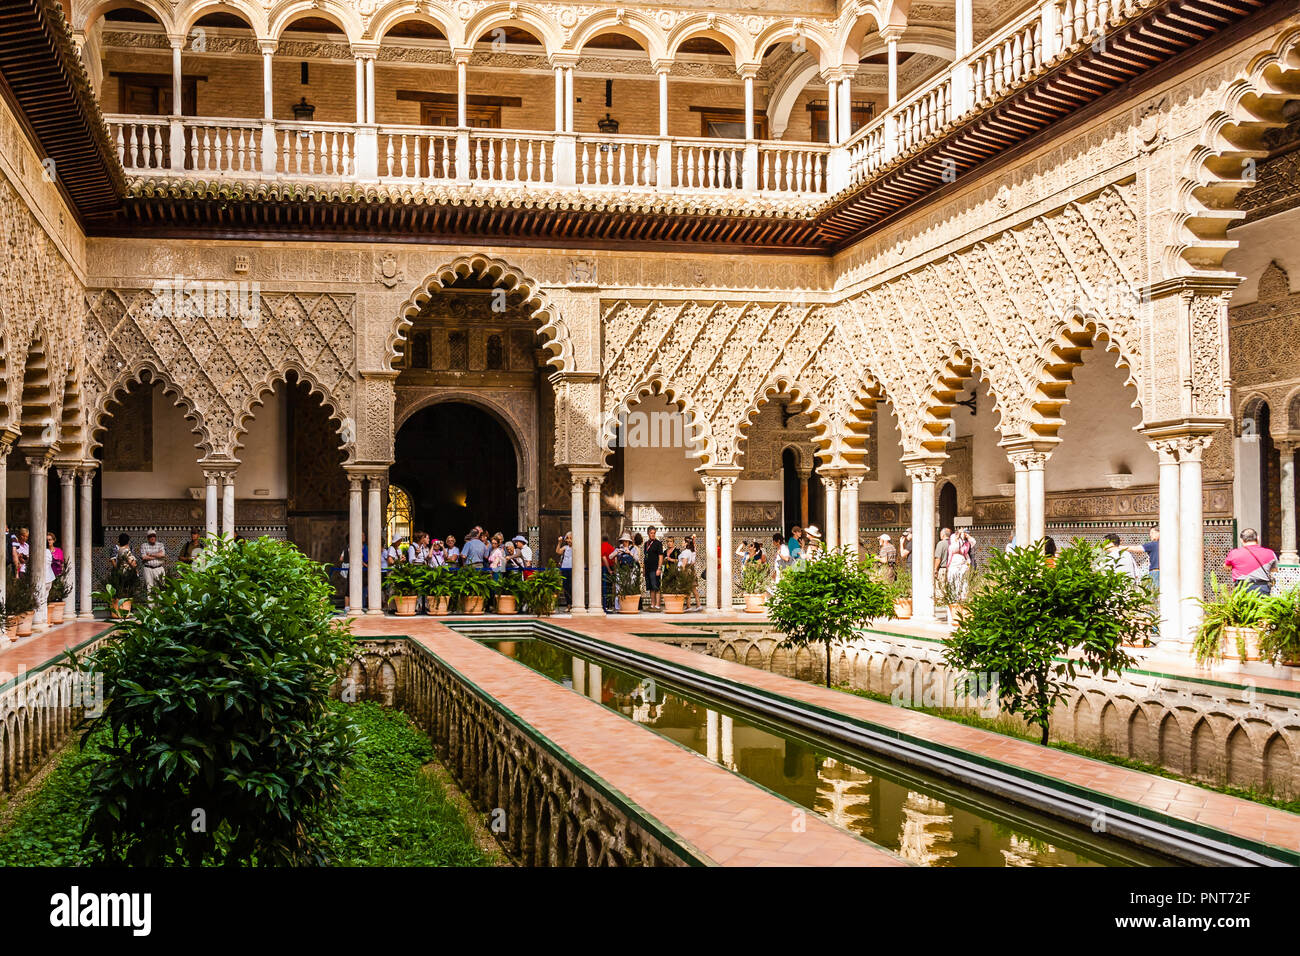 Tourists in the inner courtyard of the Reales Alcazares, Seville, Spain. Stock Photo